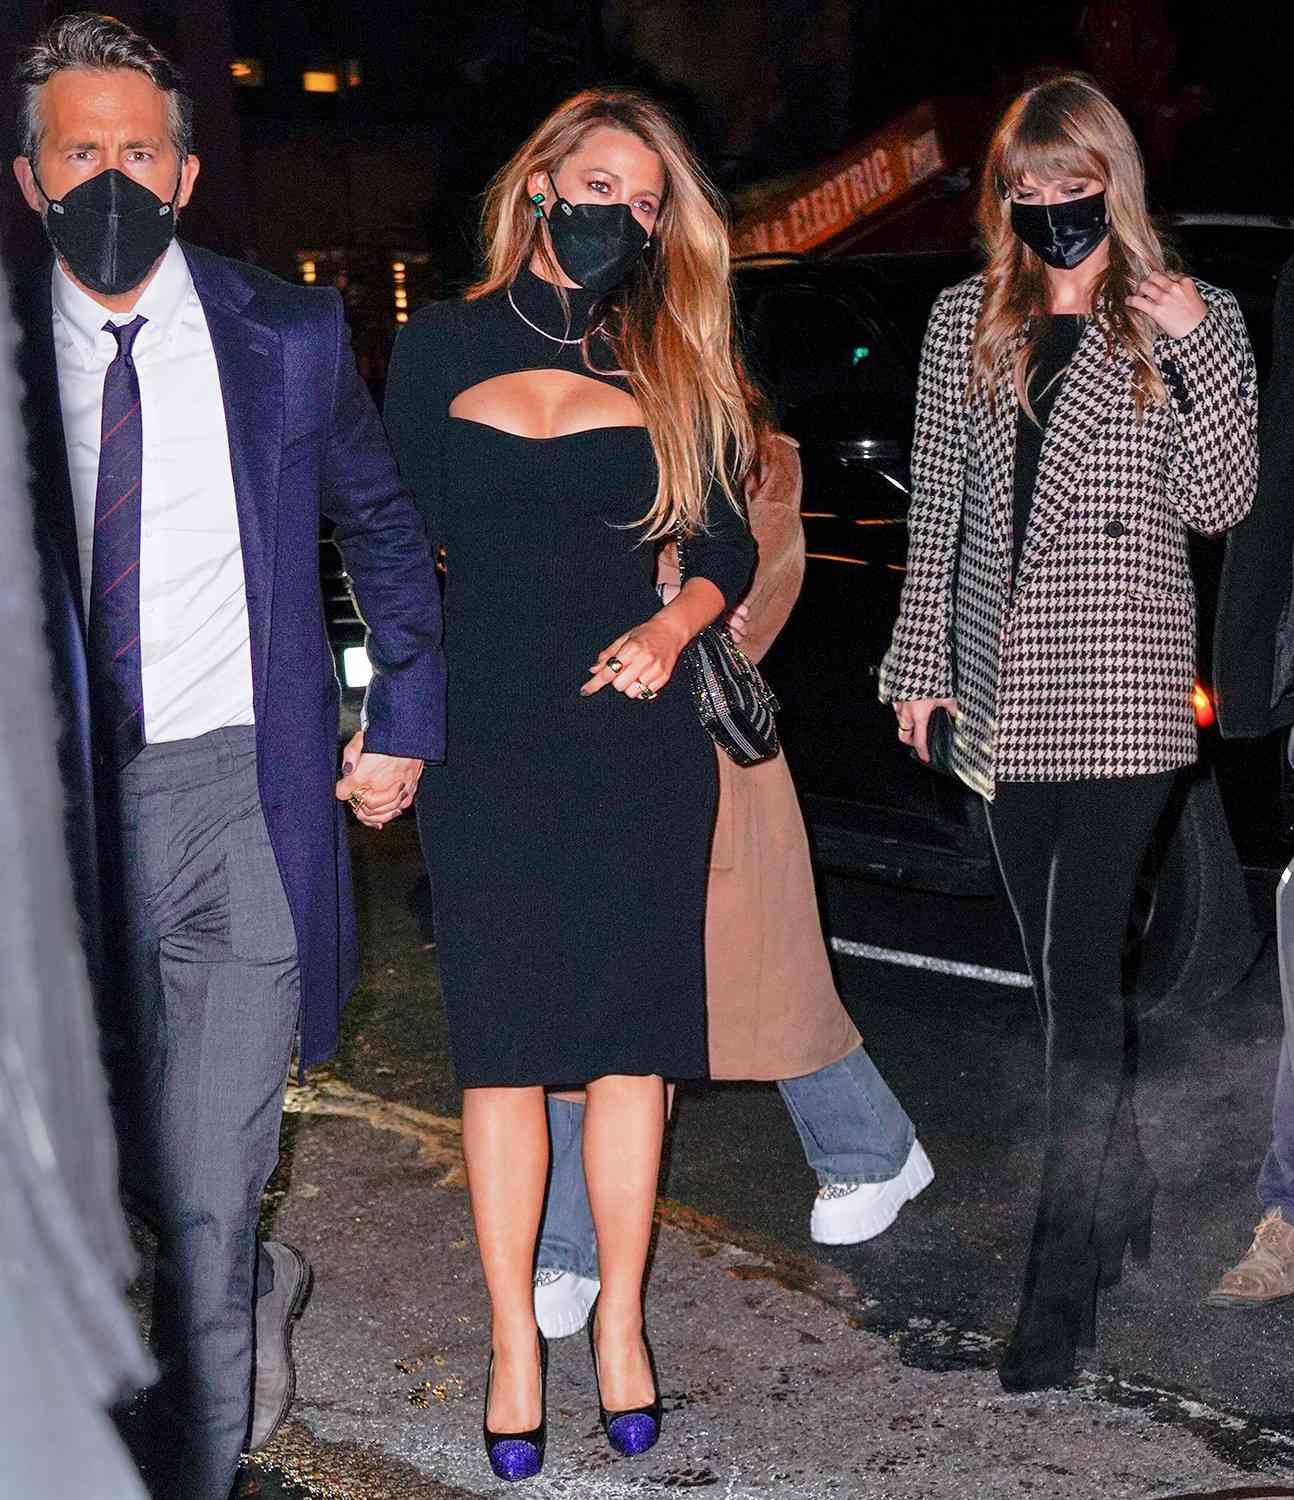 Taylor Swift, Blake Lively, Ryan Reynolds arrive at SNL Afterparty at L'Avenue on November 14, 2021 in New York City.